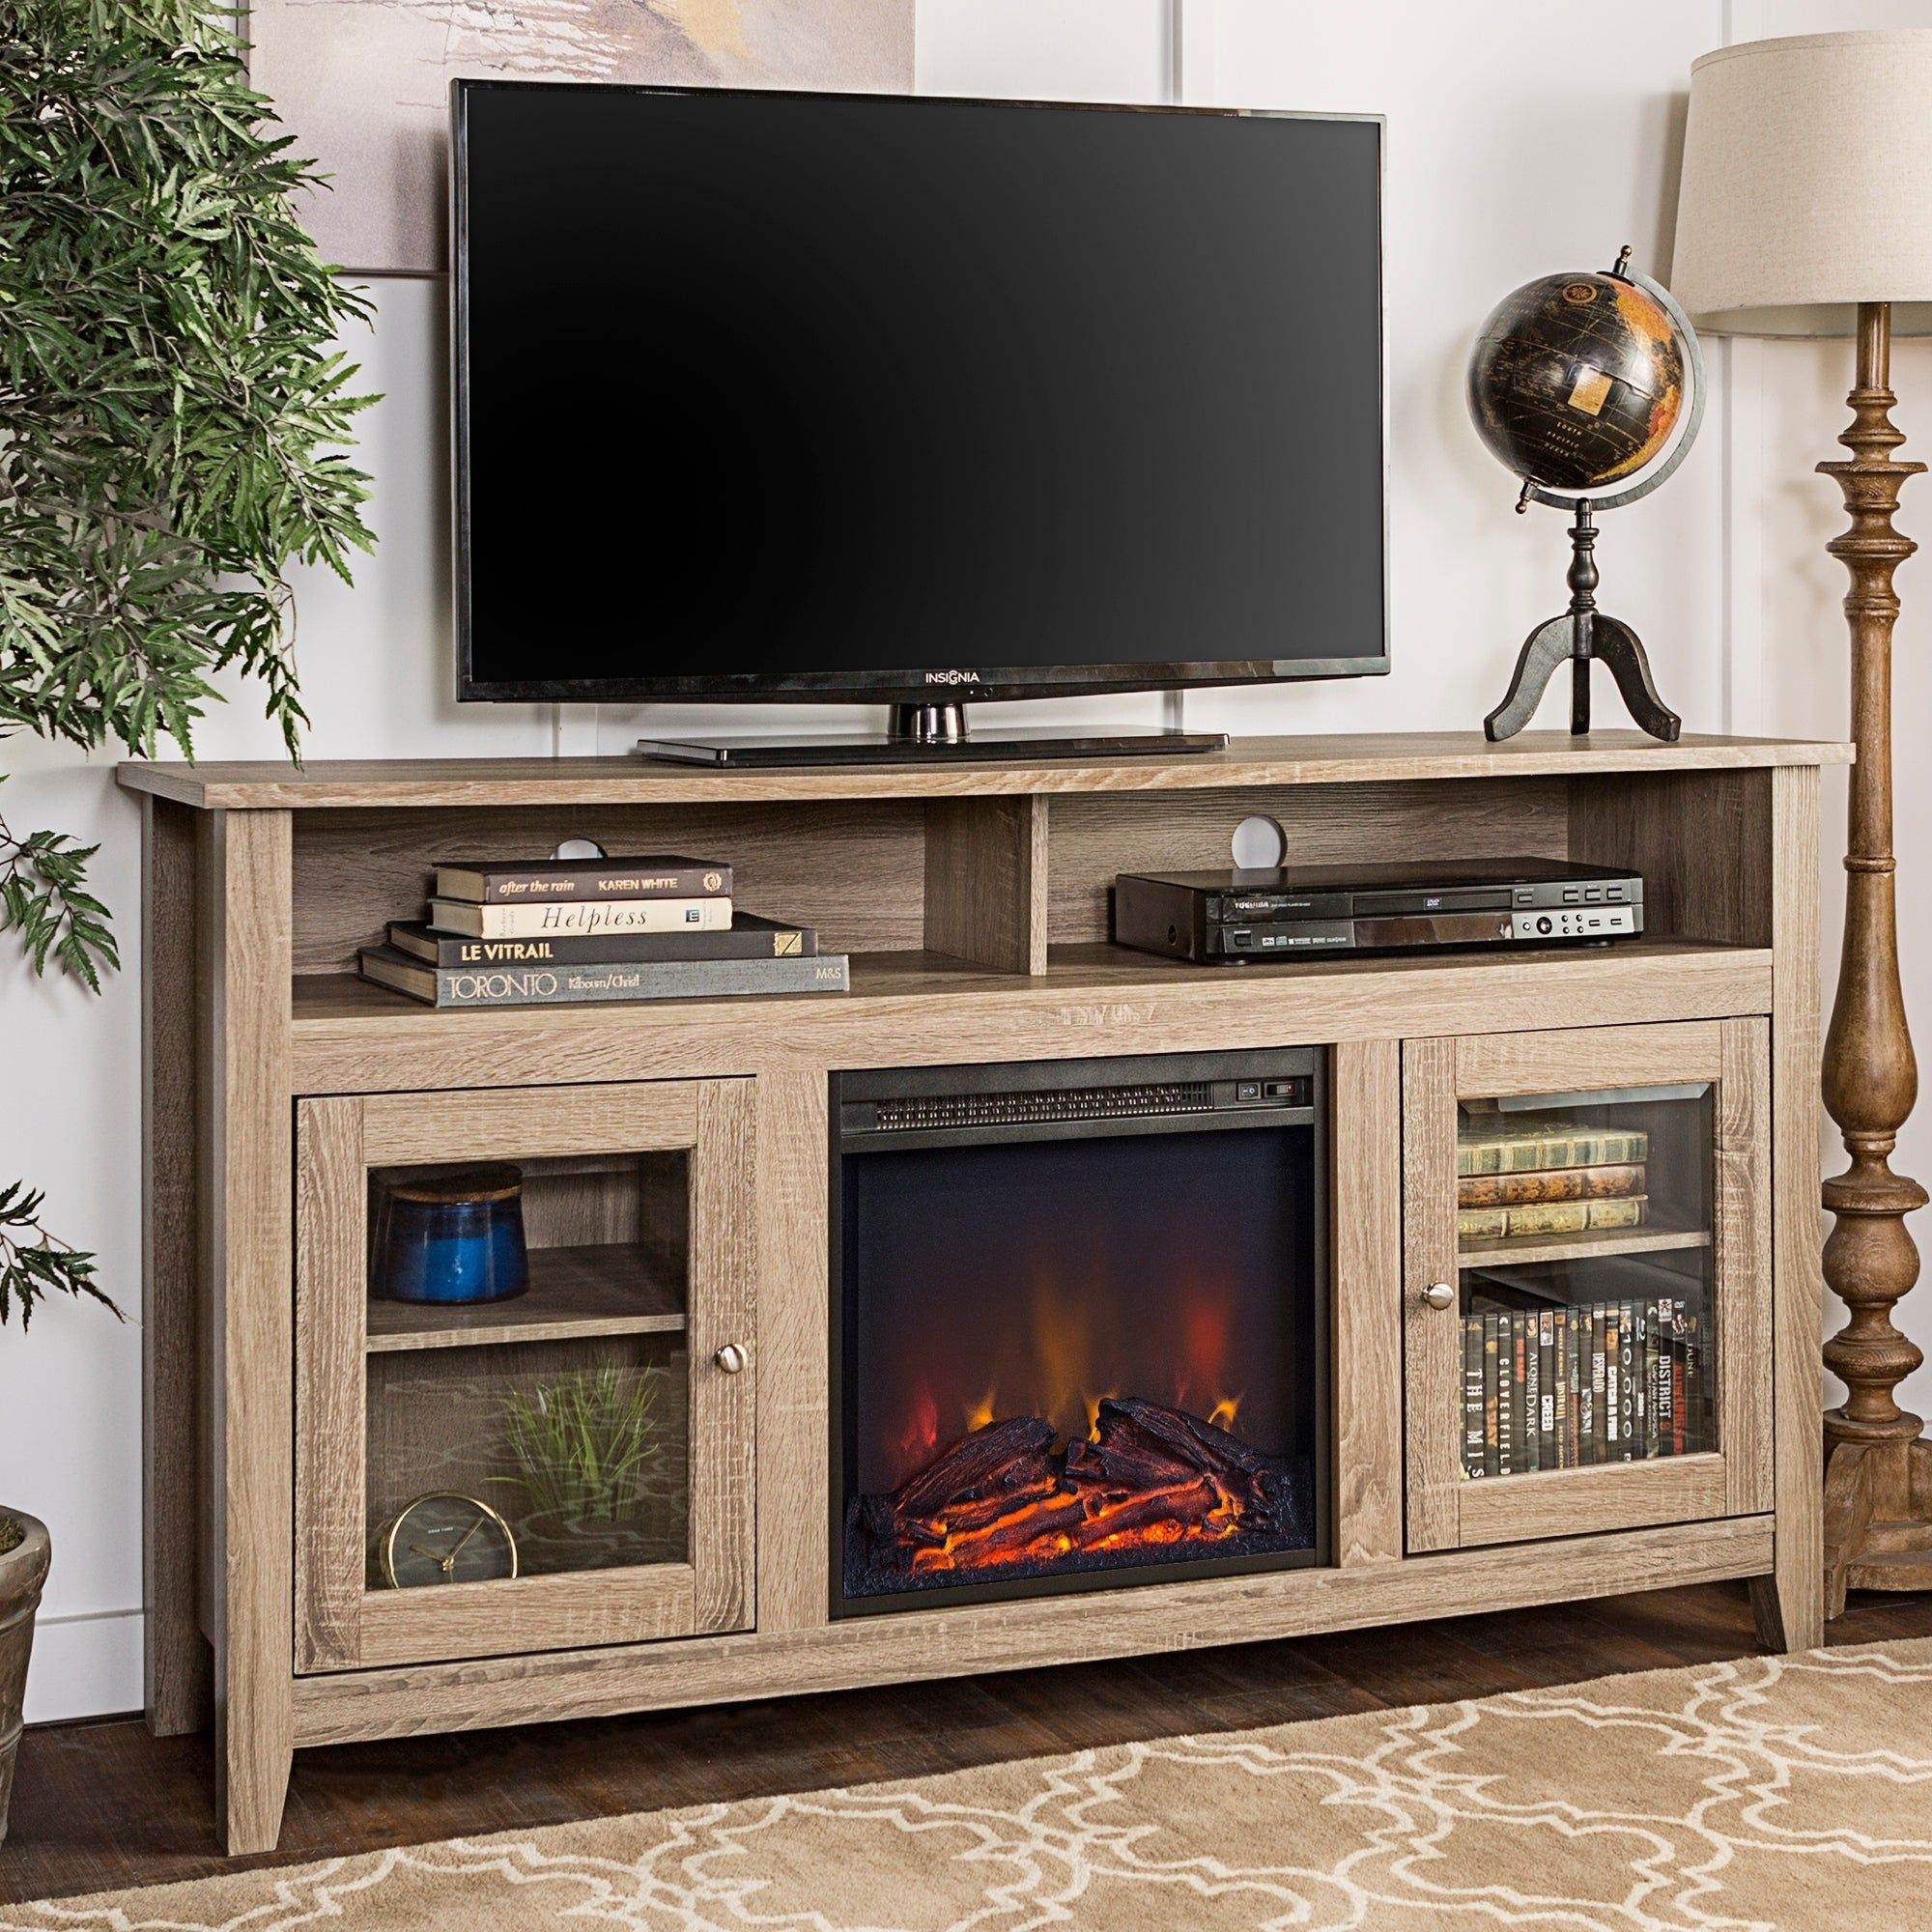 Middlebrook Designs 58 Inch Driftwood Highboy Fireplace Tv In Broward Tv Stands For Tvs Up To 70" (View 4 of 15)